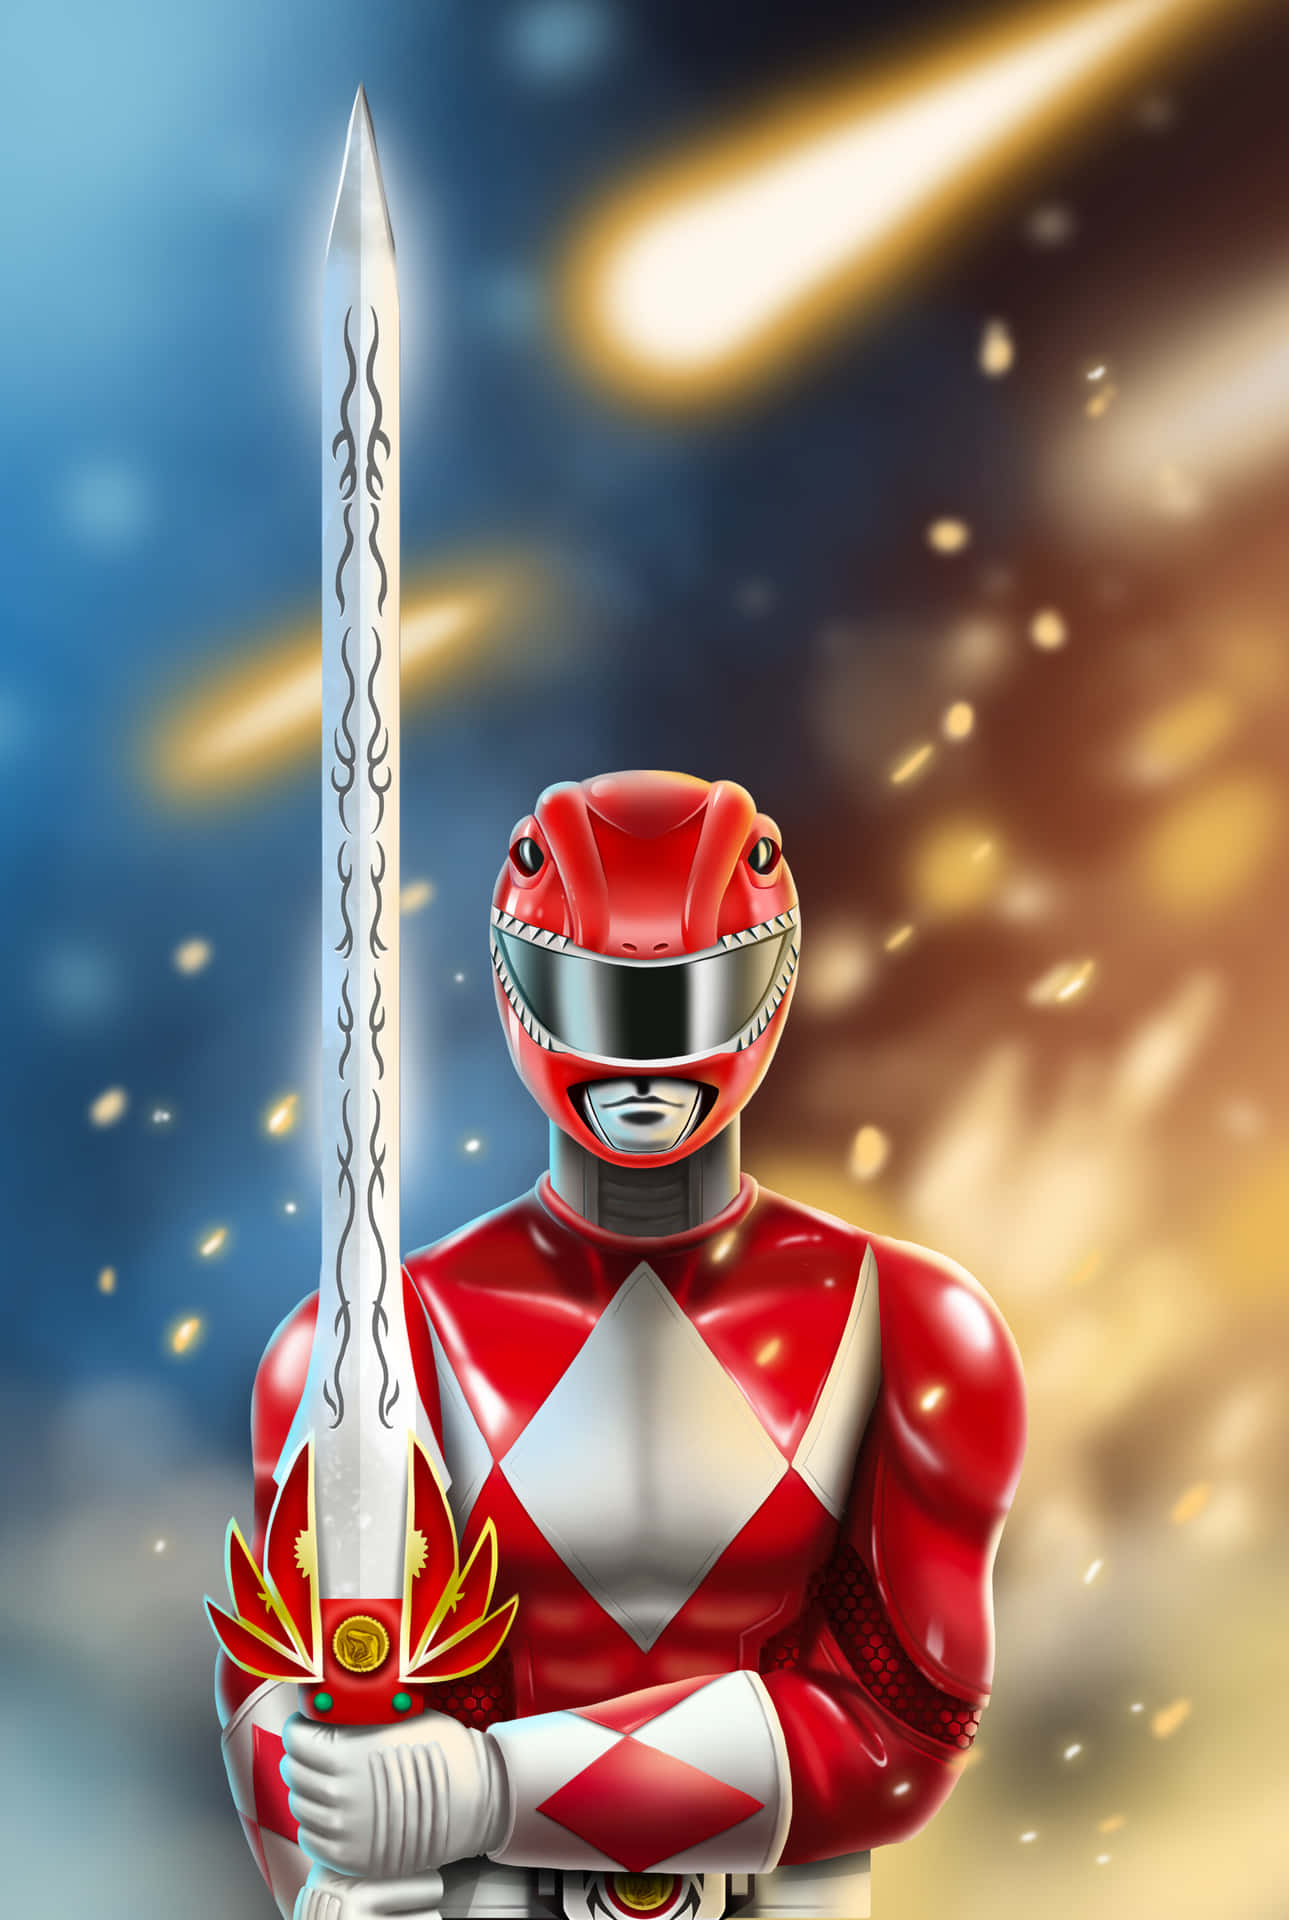 Red Ranger With Power Sword Wallpaper